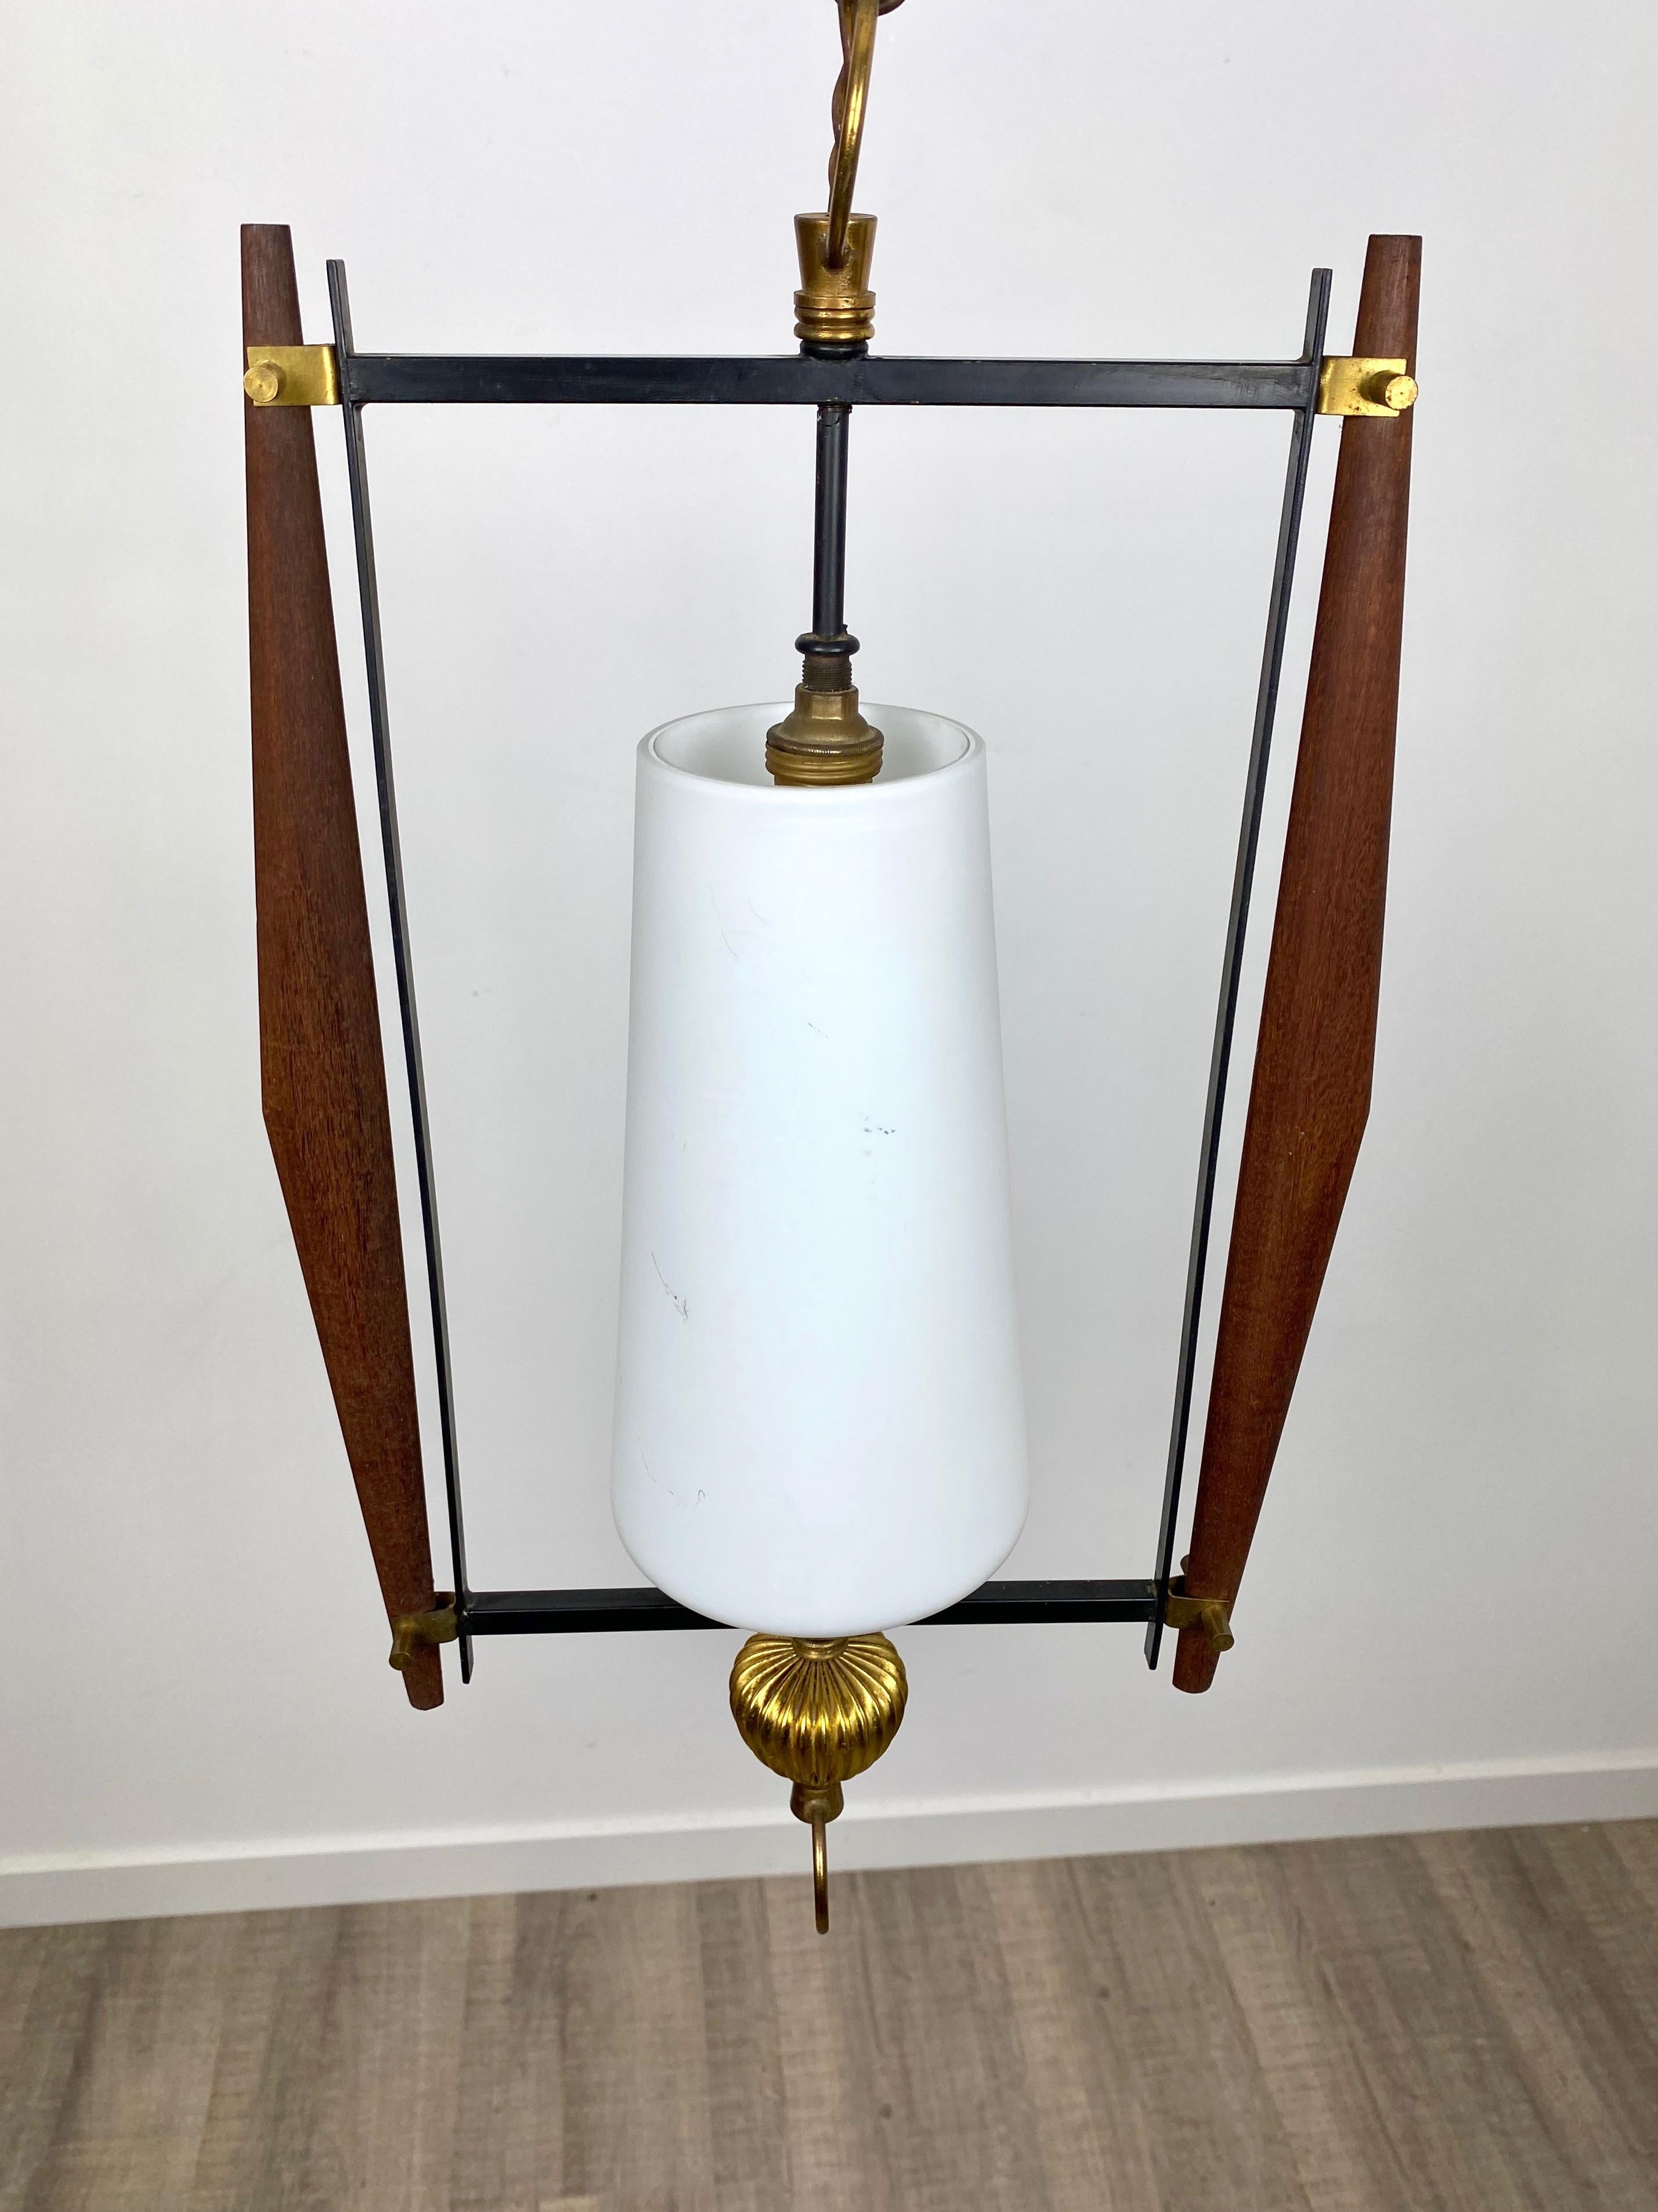 Chandelier in teak, opaline glass and metal with pendant in Stilnovo style, Italy, 1960s.

Measures: Height without pendant 46 cm
Height with pendant 90 cm.
  